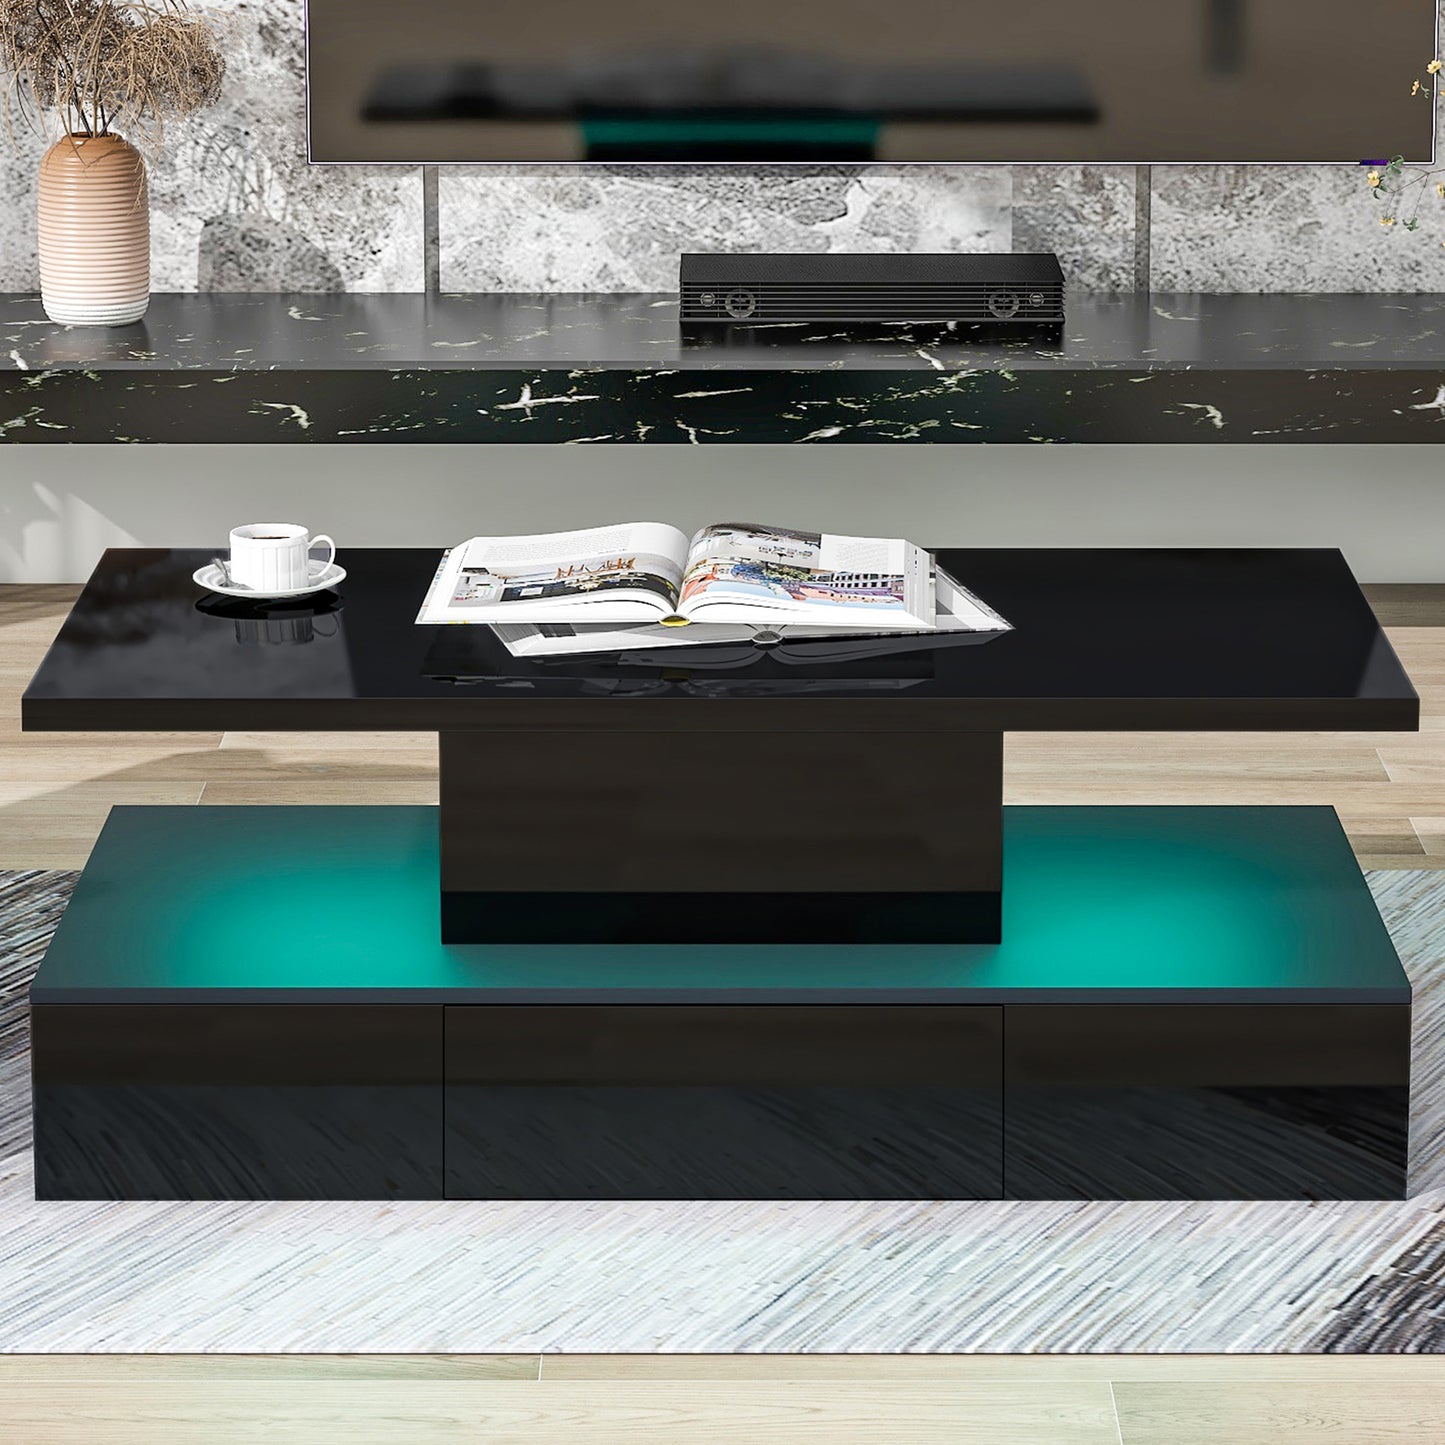 HSUNNS Black LED Coffee Table for Living Room, Modern High Glossy Center Table with 4 Drawers, Smart Cocktail Table Rectangle, Sofa Side Tea Tables with LED Lights, 40" L×24" W×15" H